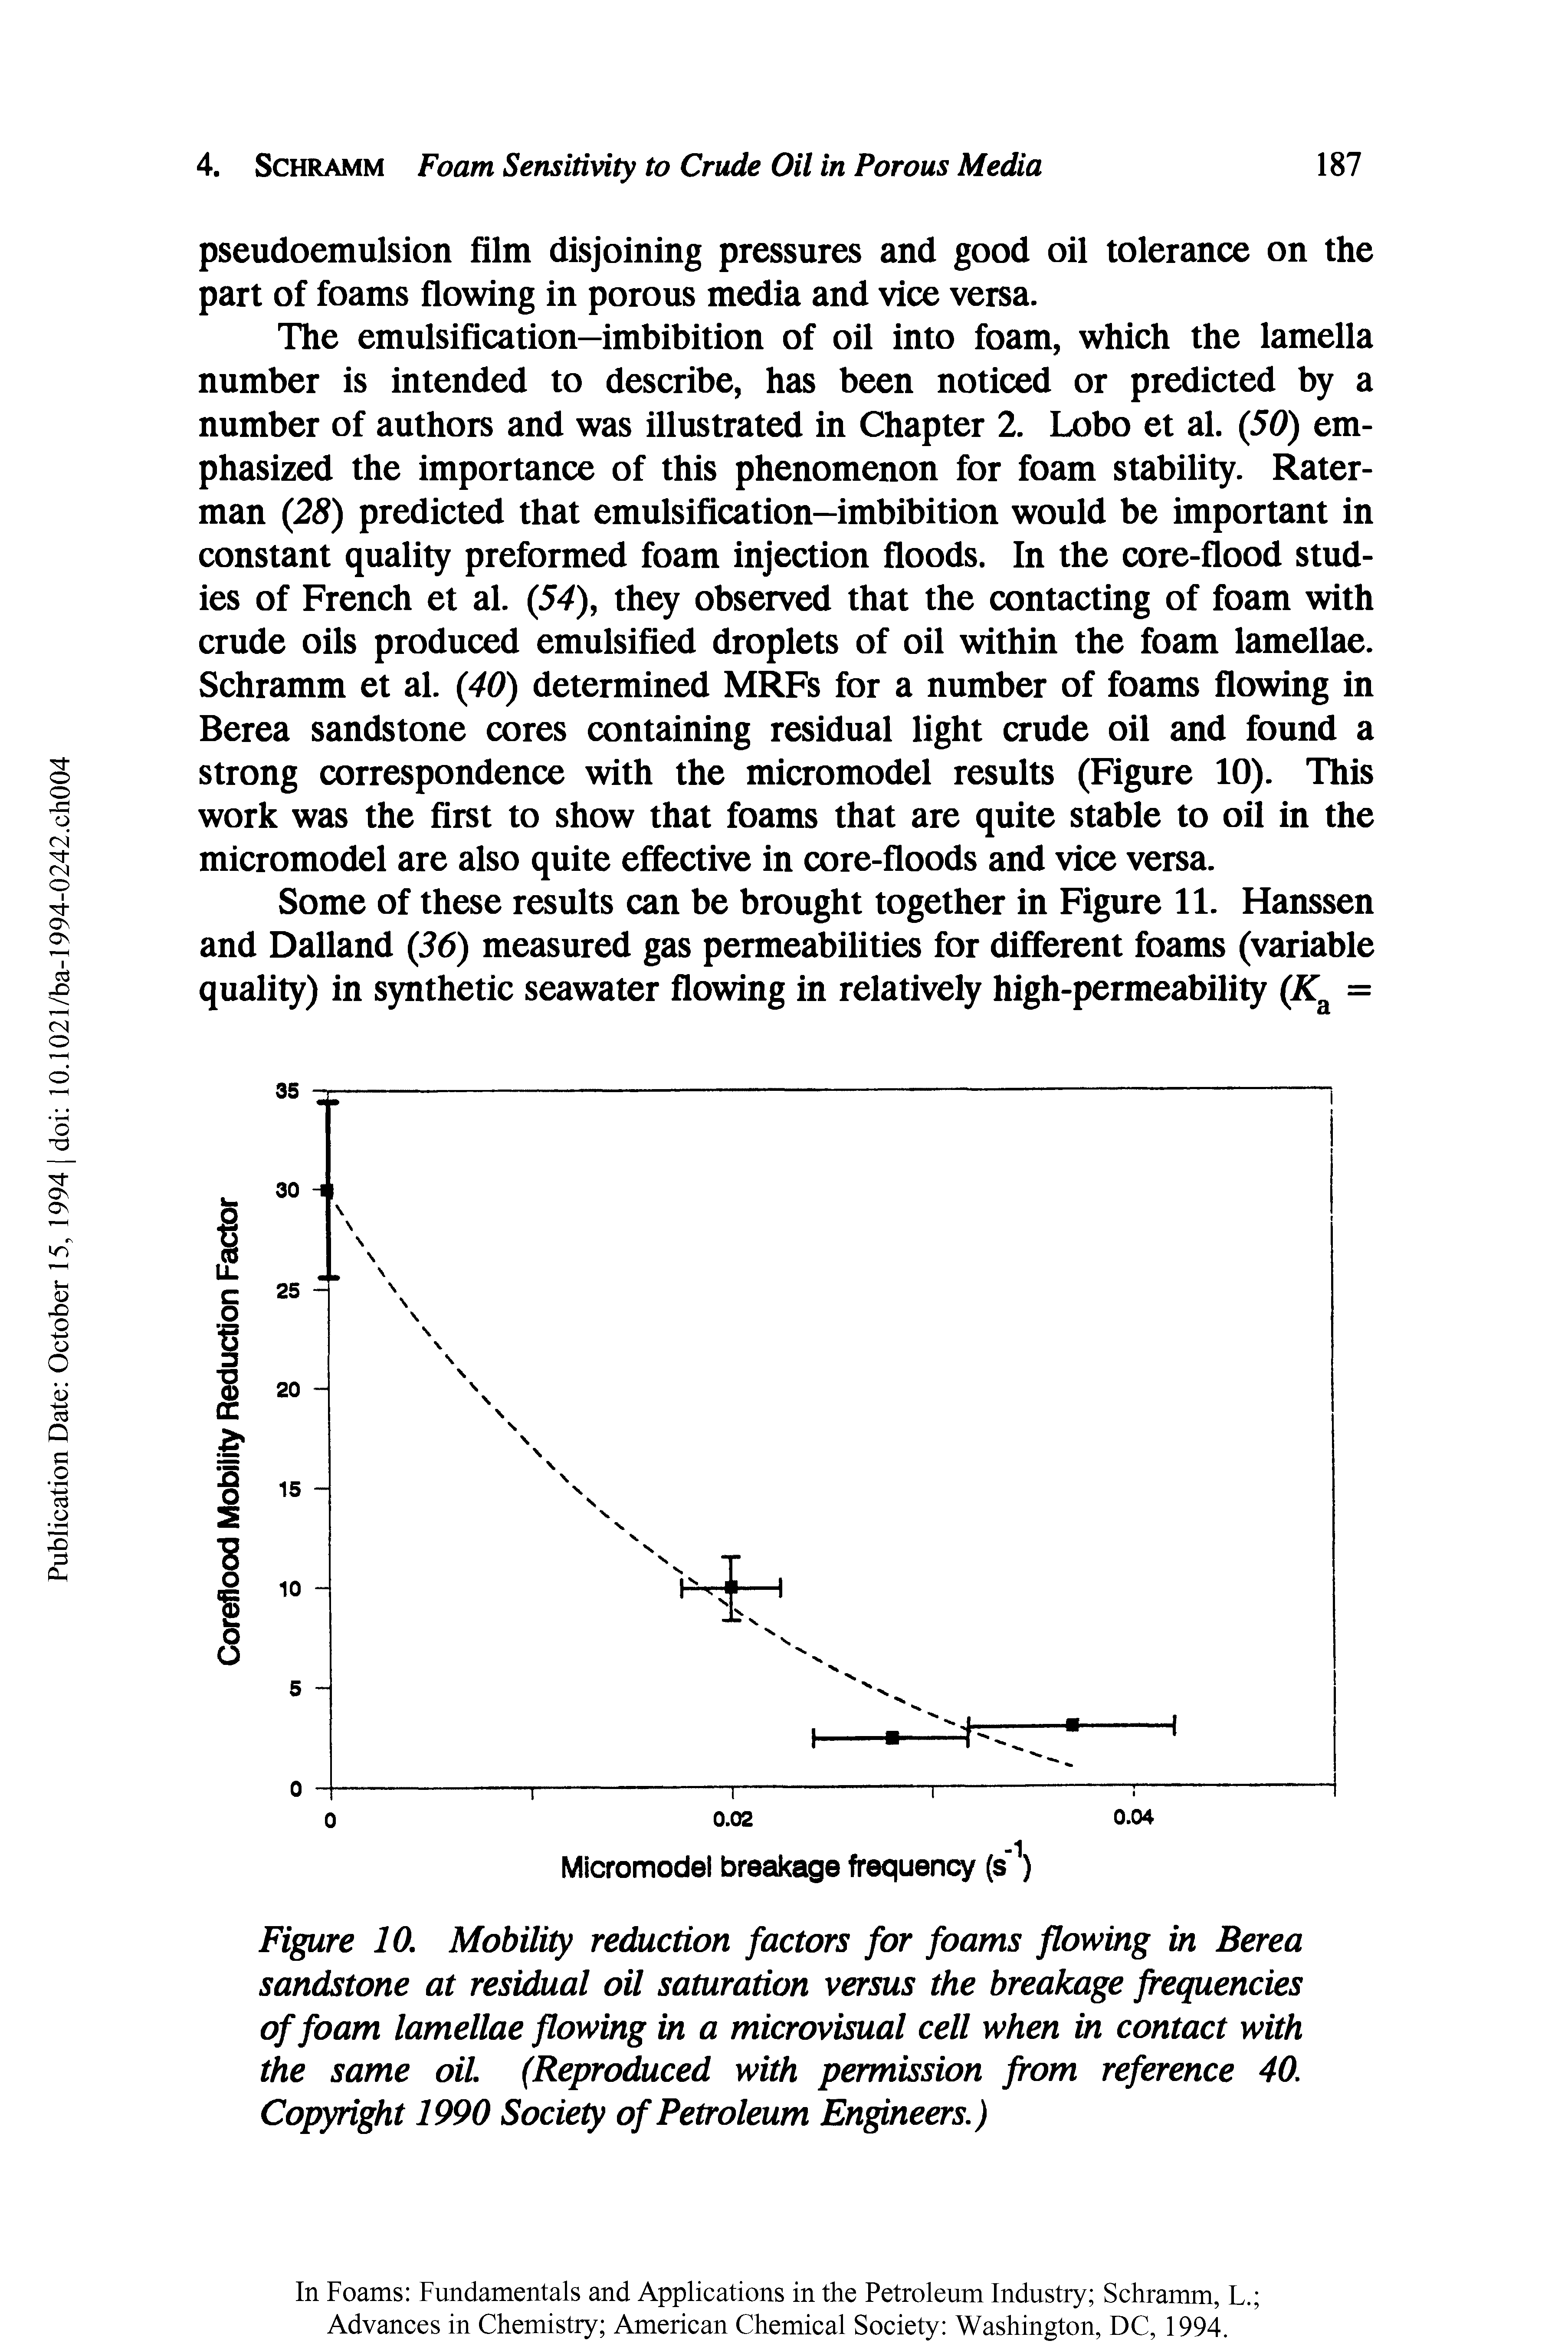 Figure 10. Mobility reduction factors for foams flowing in Berea sandstone at residual oil saturation versus the breakage frequencies of foam lamellae flowing in a microvisual cell when in contact with the same oil (Reproduced with permission from reference 40. Copyright 1990 Society of Petroleum Engineers.)...